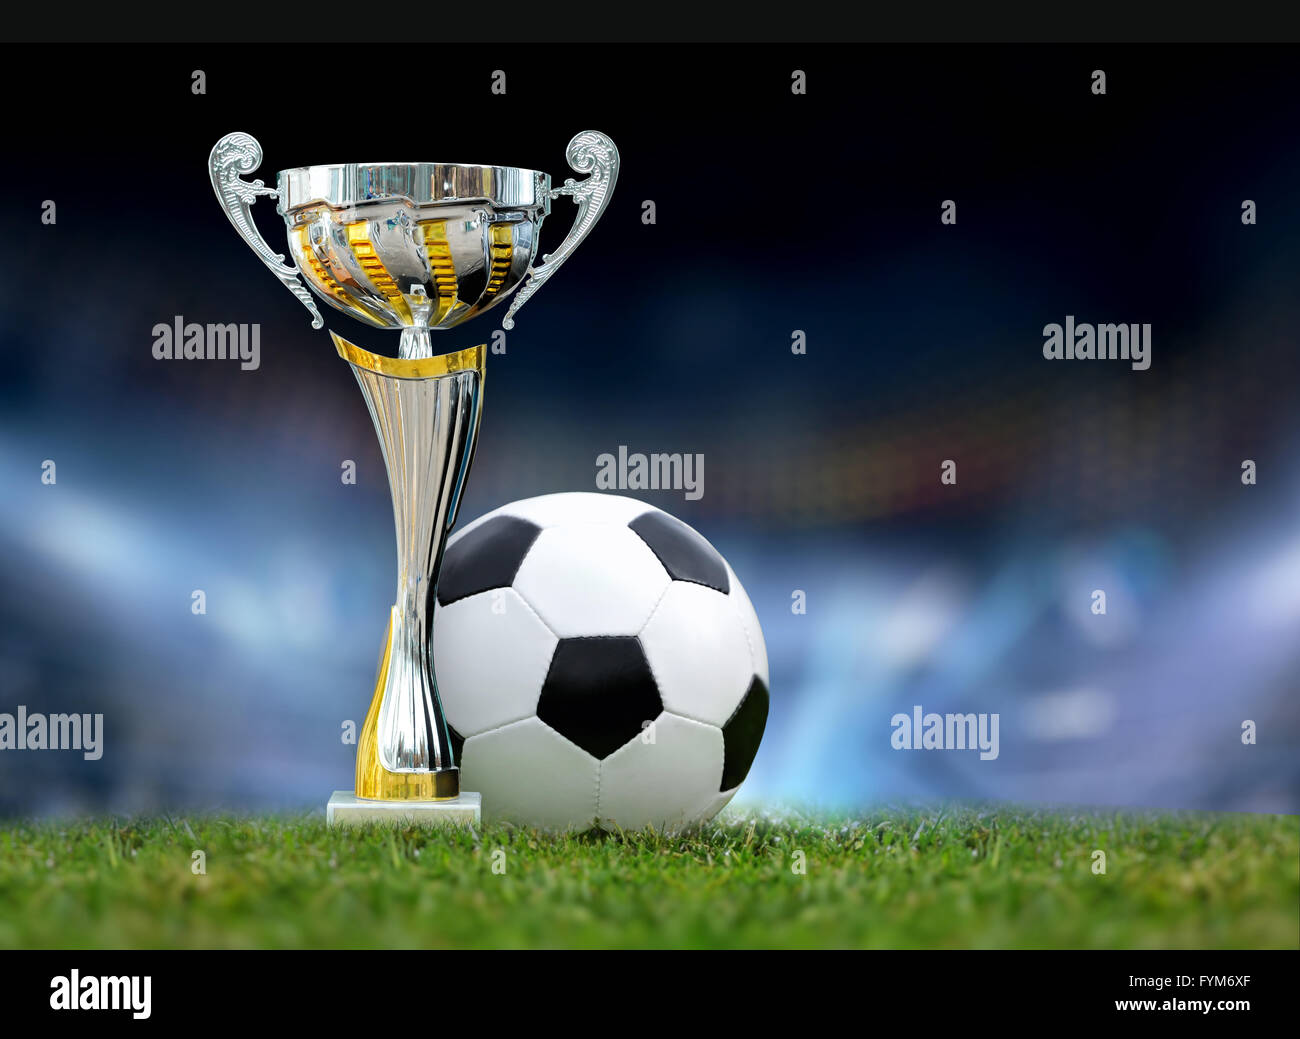 Golden trophy in grass on soccer field background Stock Photo